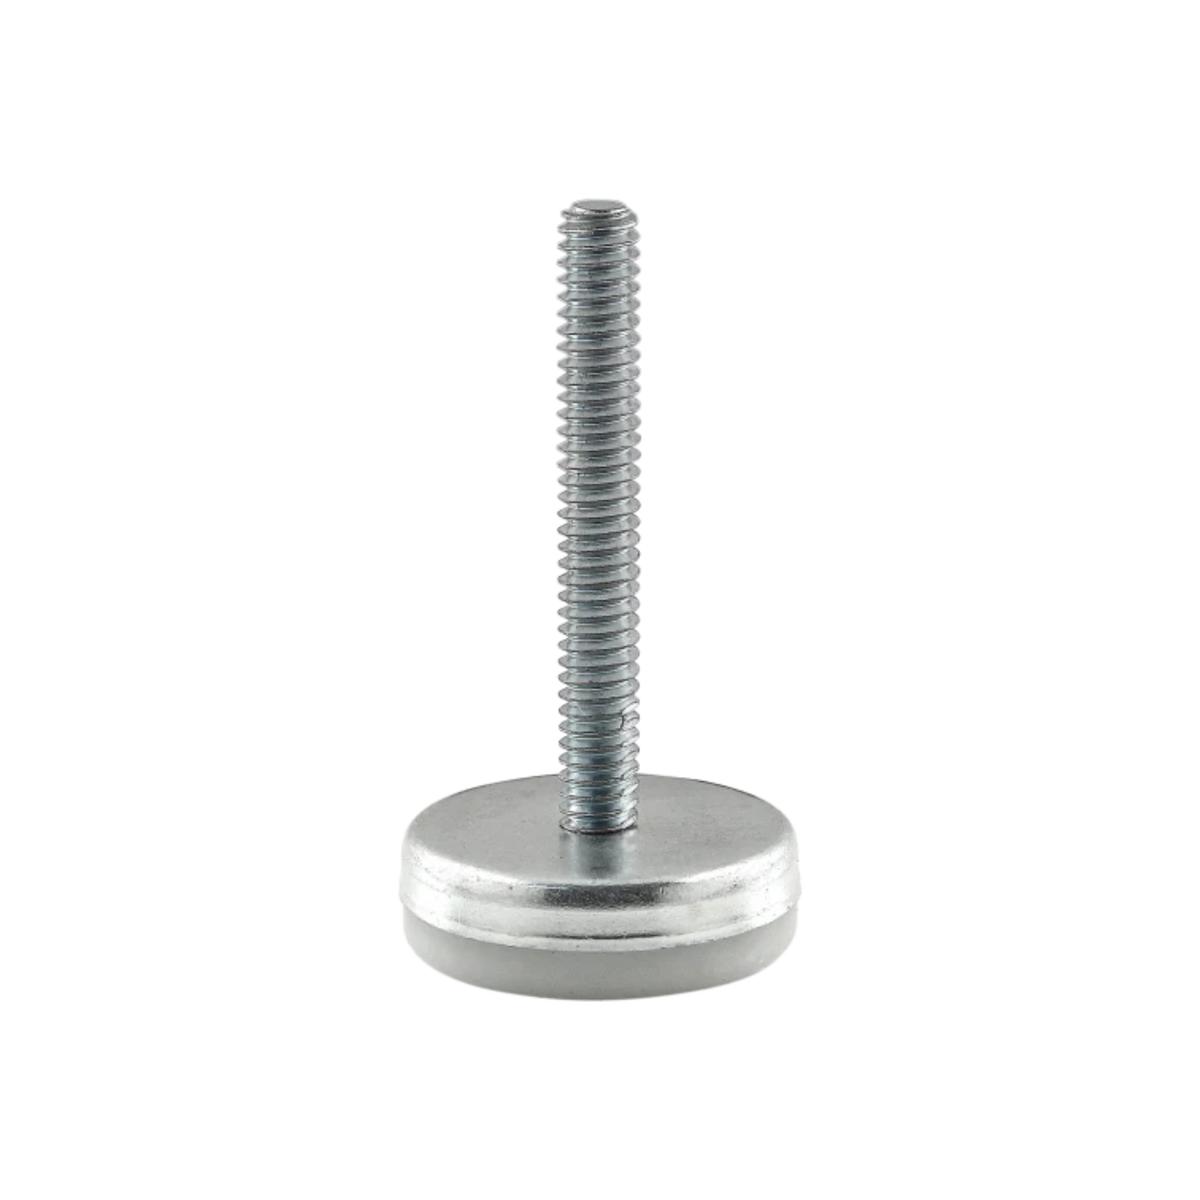 round nickel plated metal base at the bottom with a long threaded stem inserted into the middle